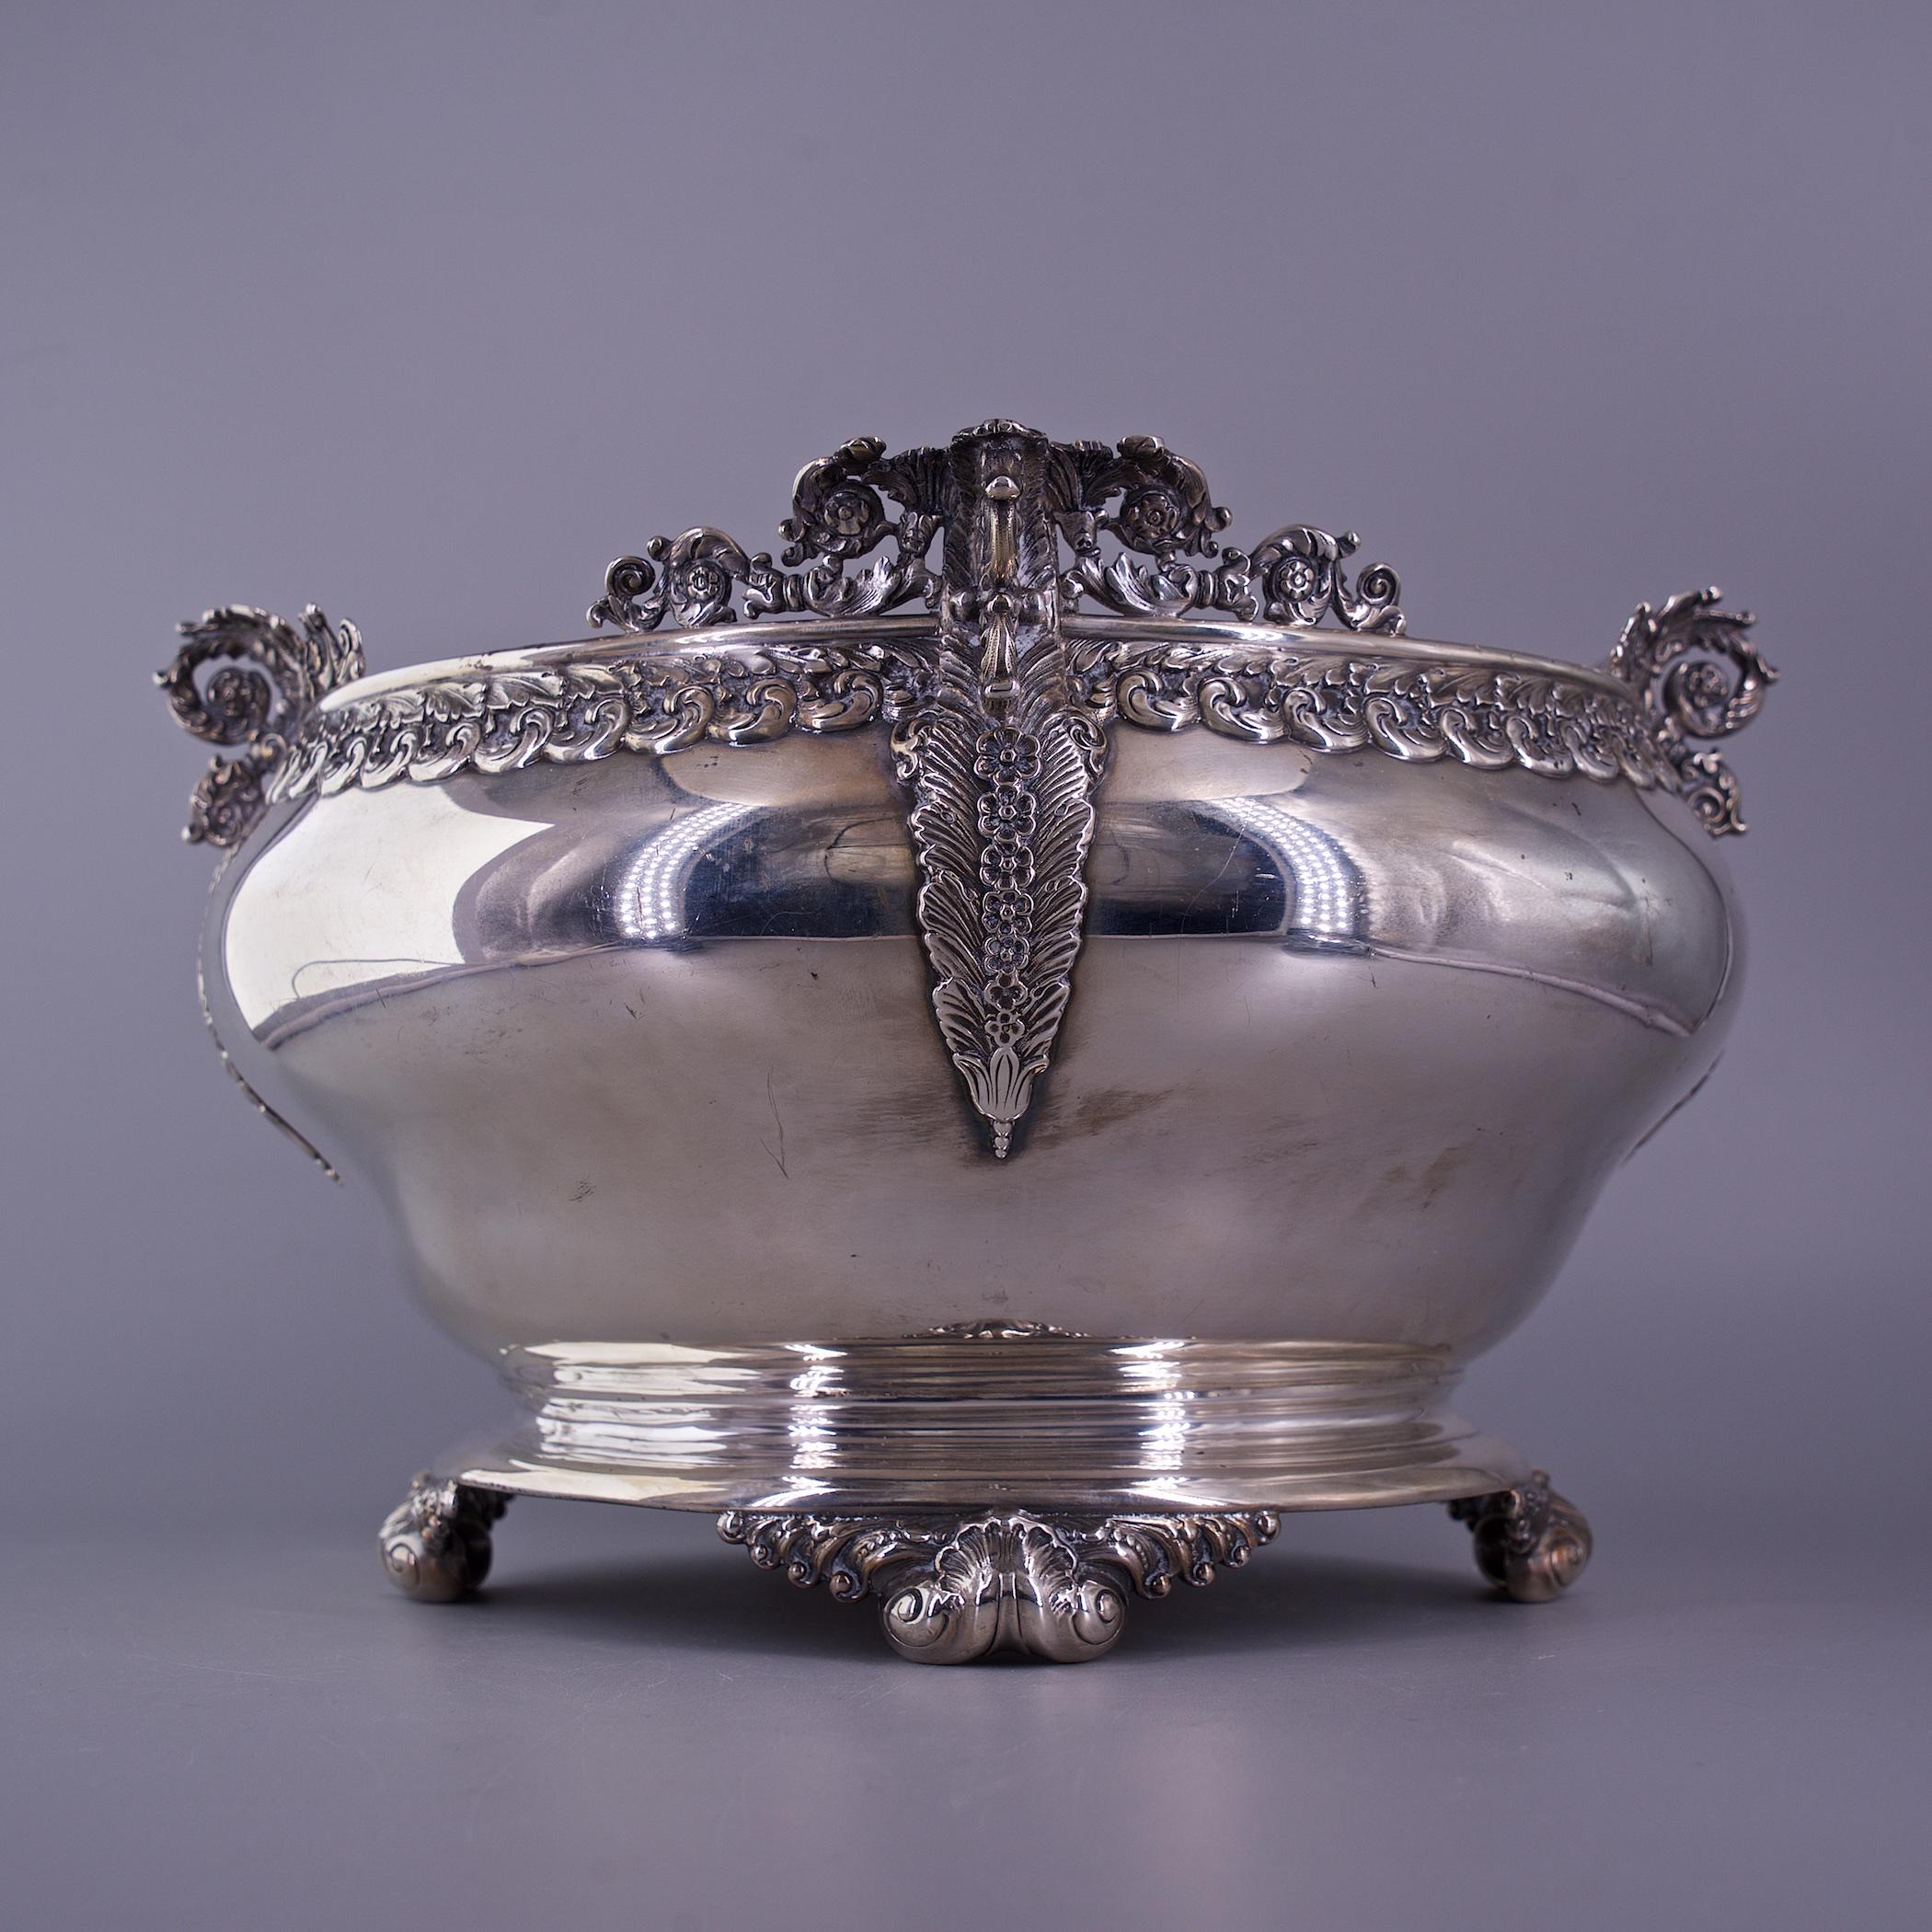 Impressive 19th C. Tiffany and Co sterling silver quad-footed fruit bowl with feather or leaf handles. Stamped with the 